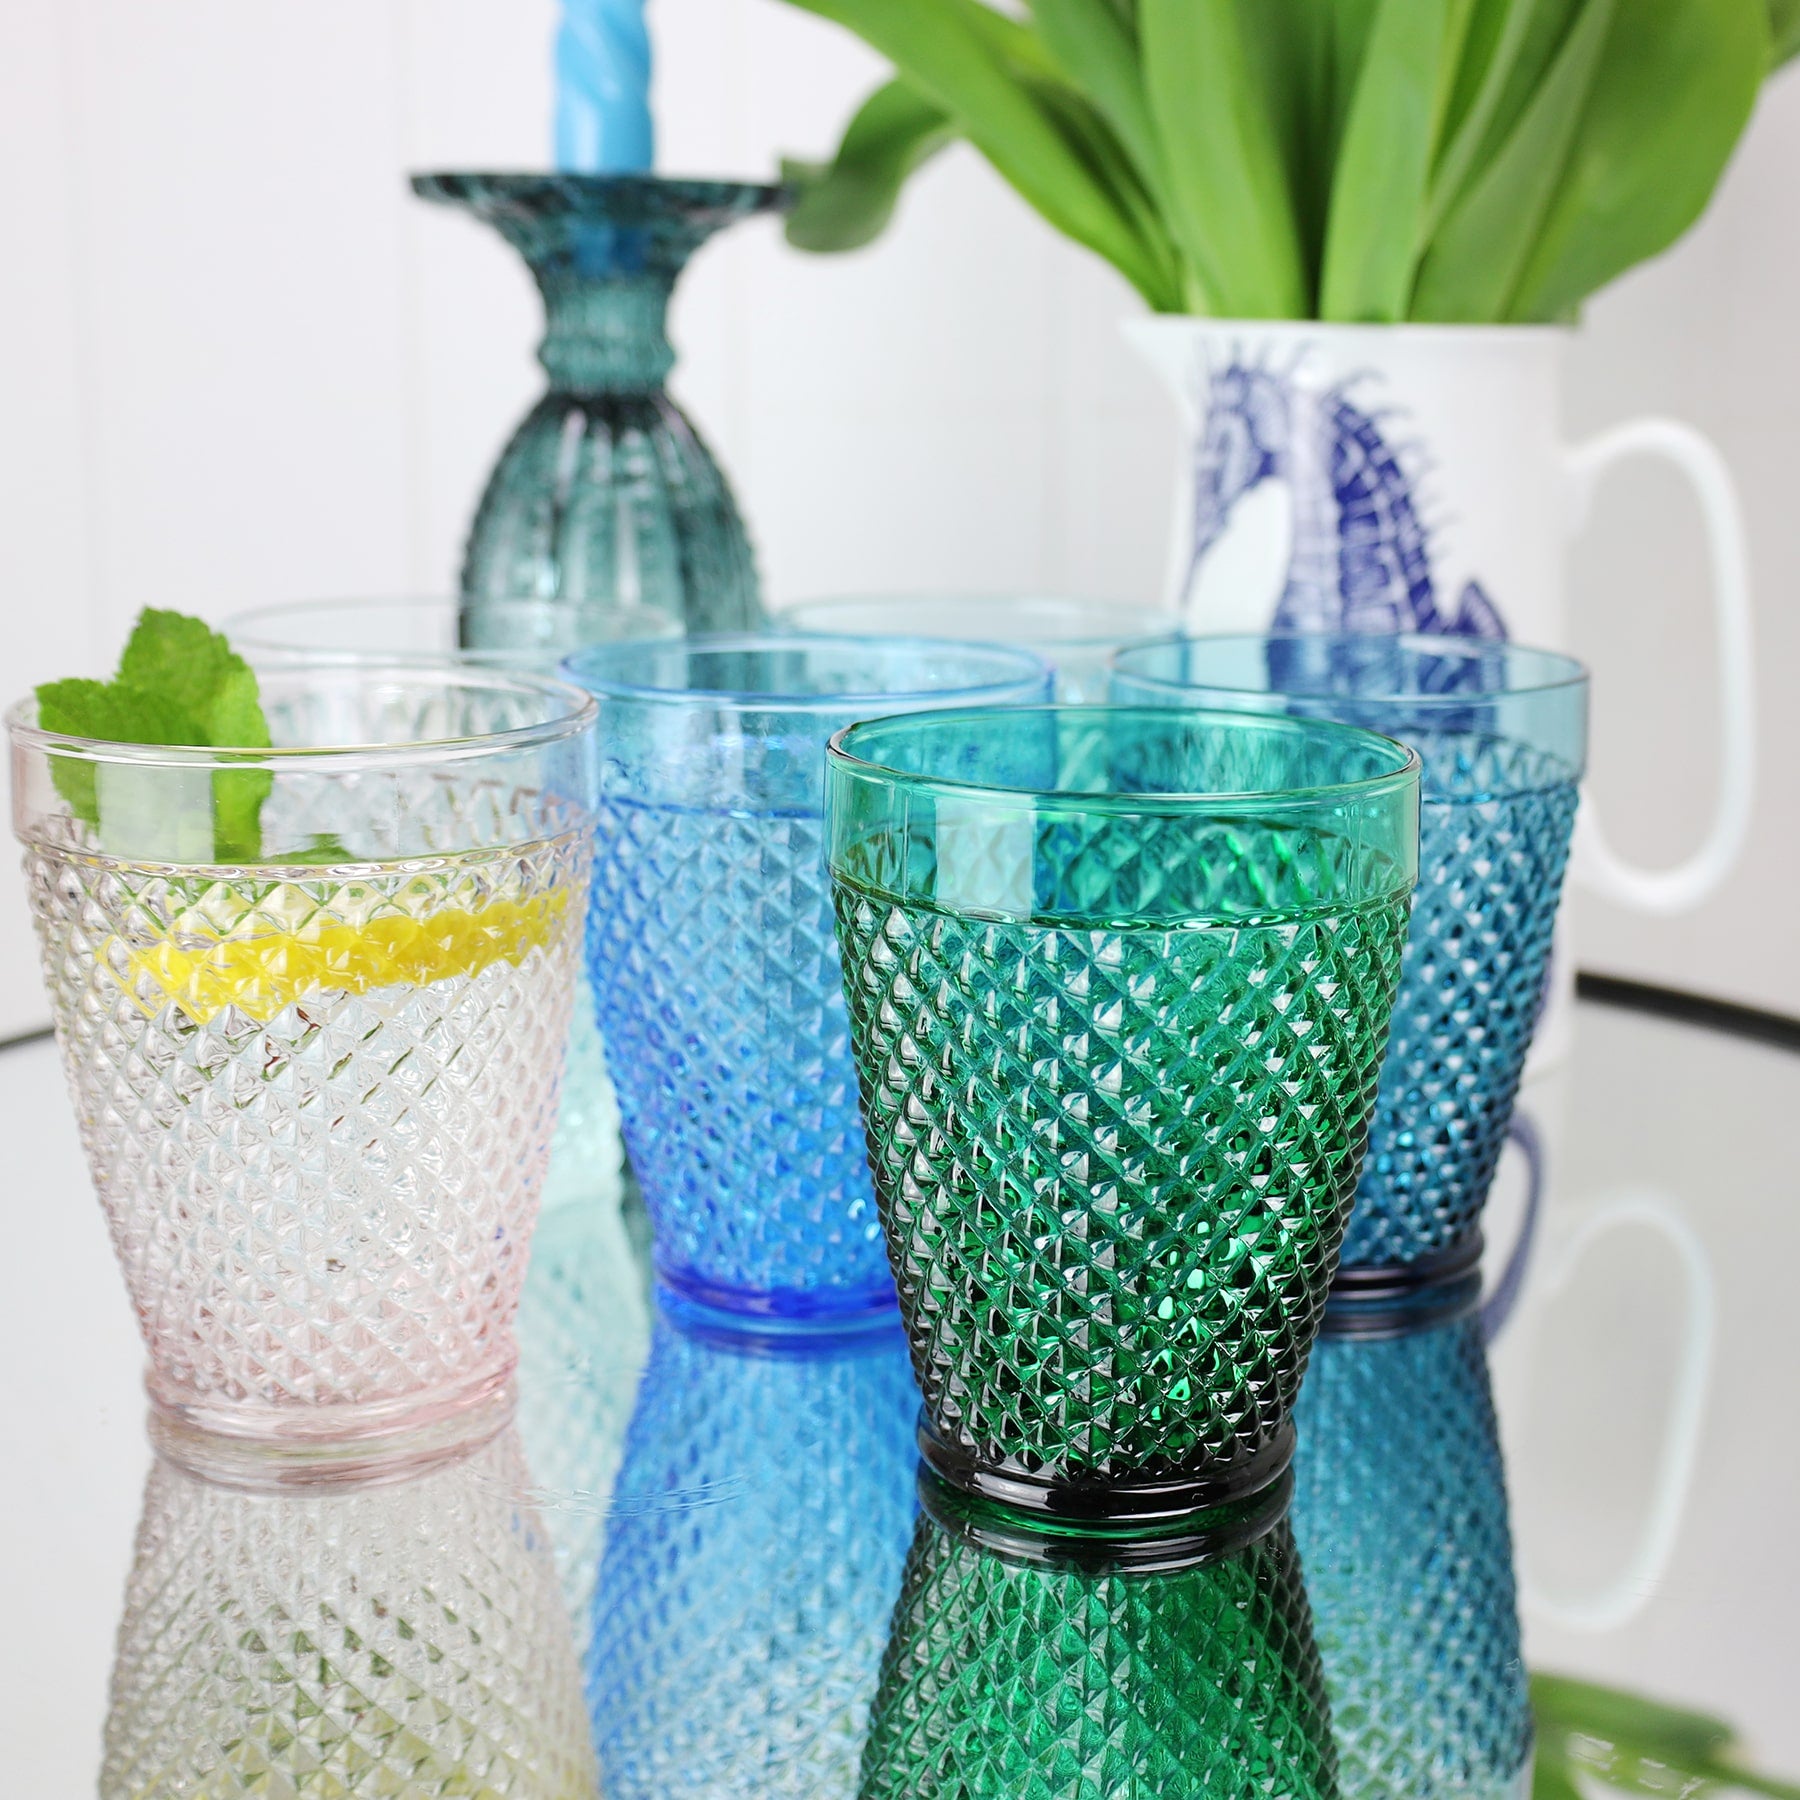 Lifestyle shot of four diamond cut tumblers on a mirror table,withaa seahorse jug in the background filled with tulips